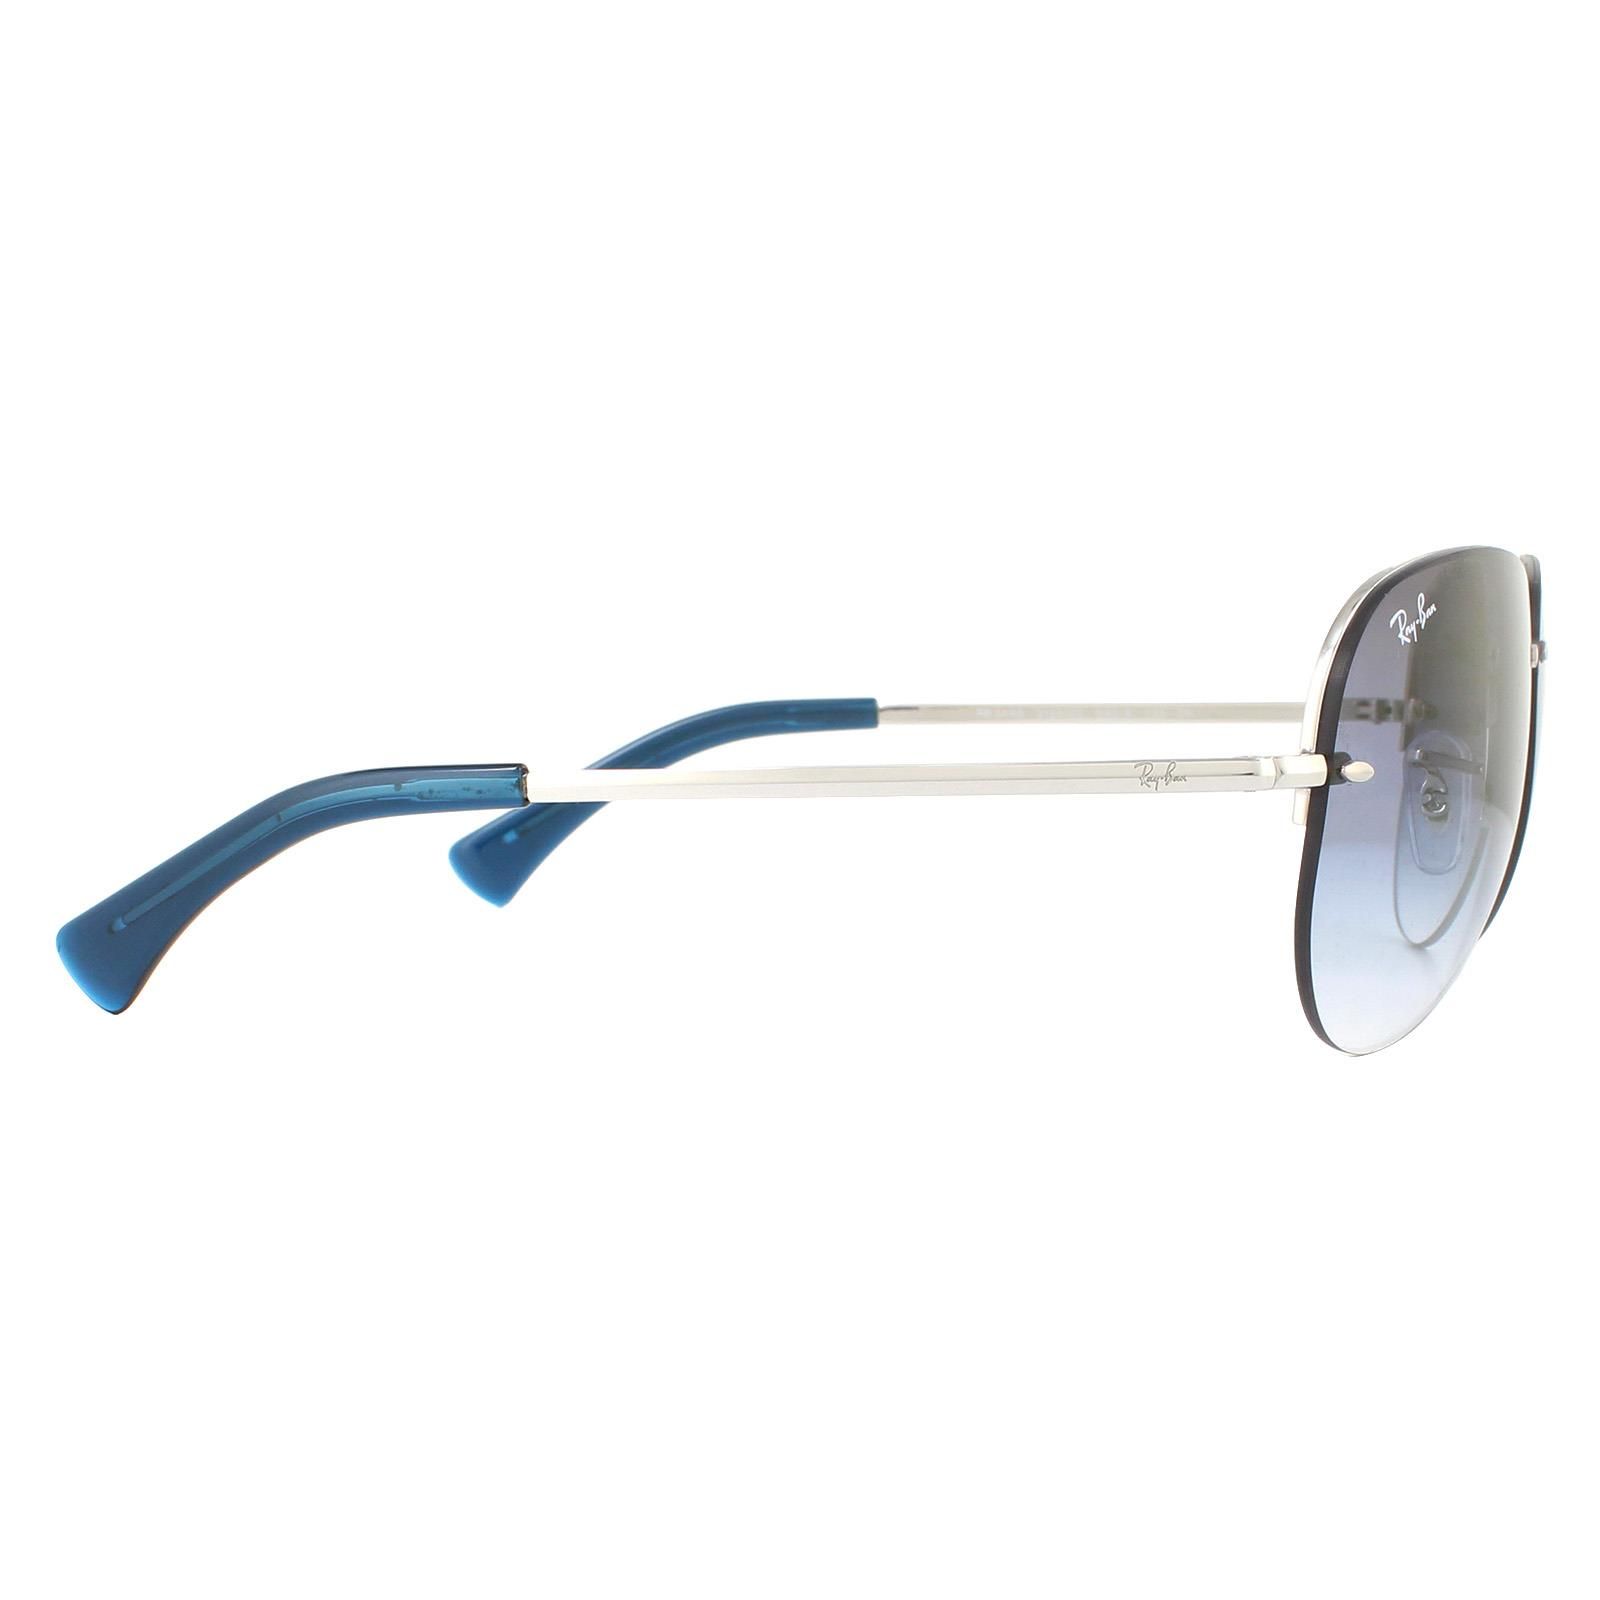 Ray-Ban Sunglasses RB3449 91290S Silver Clear Blue Grey Gradient  are a classic aviator shape but with a rimless lens that give them a modern contemporary twist that is quite brilliant